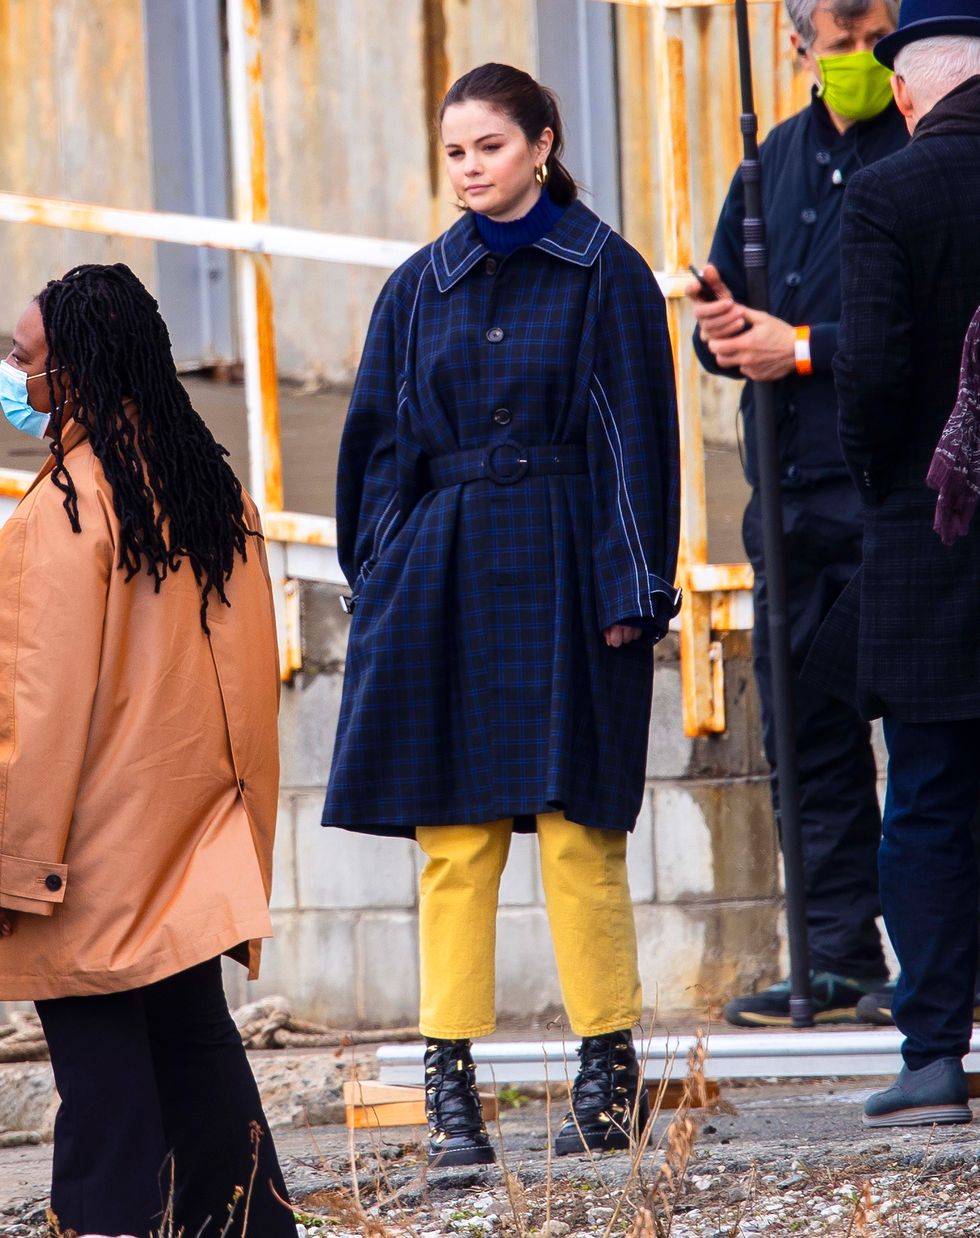 Selena Gomez Wore a Navy Coat and Yellow Pants to Film Only